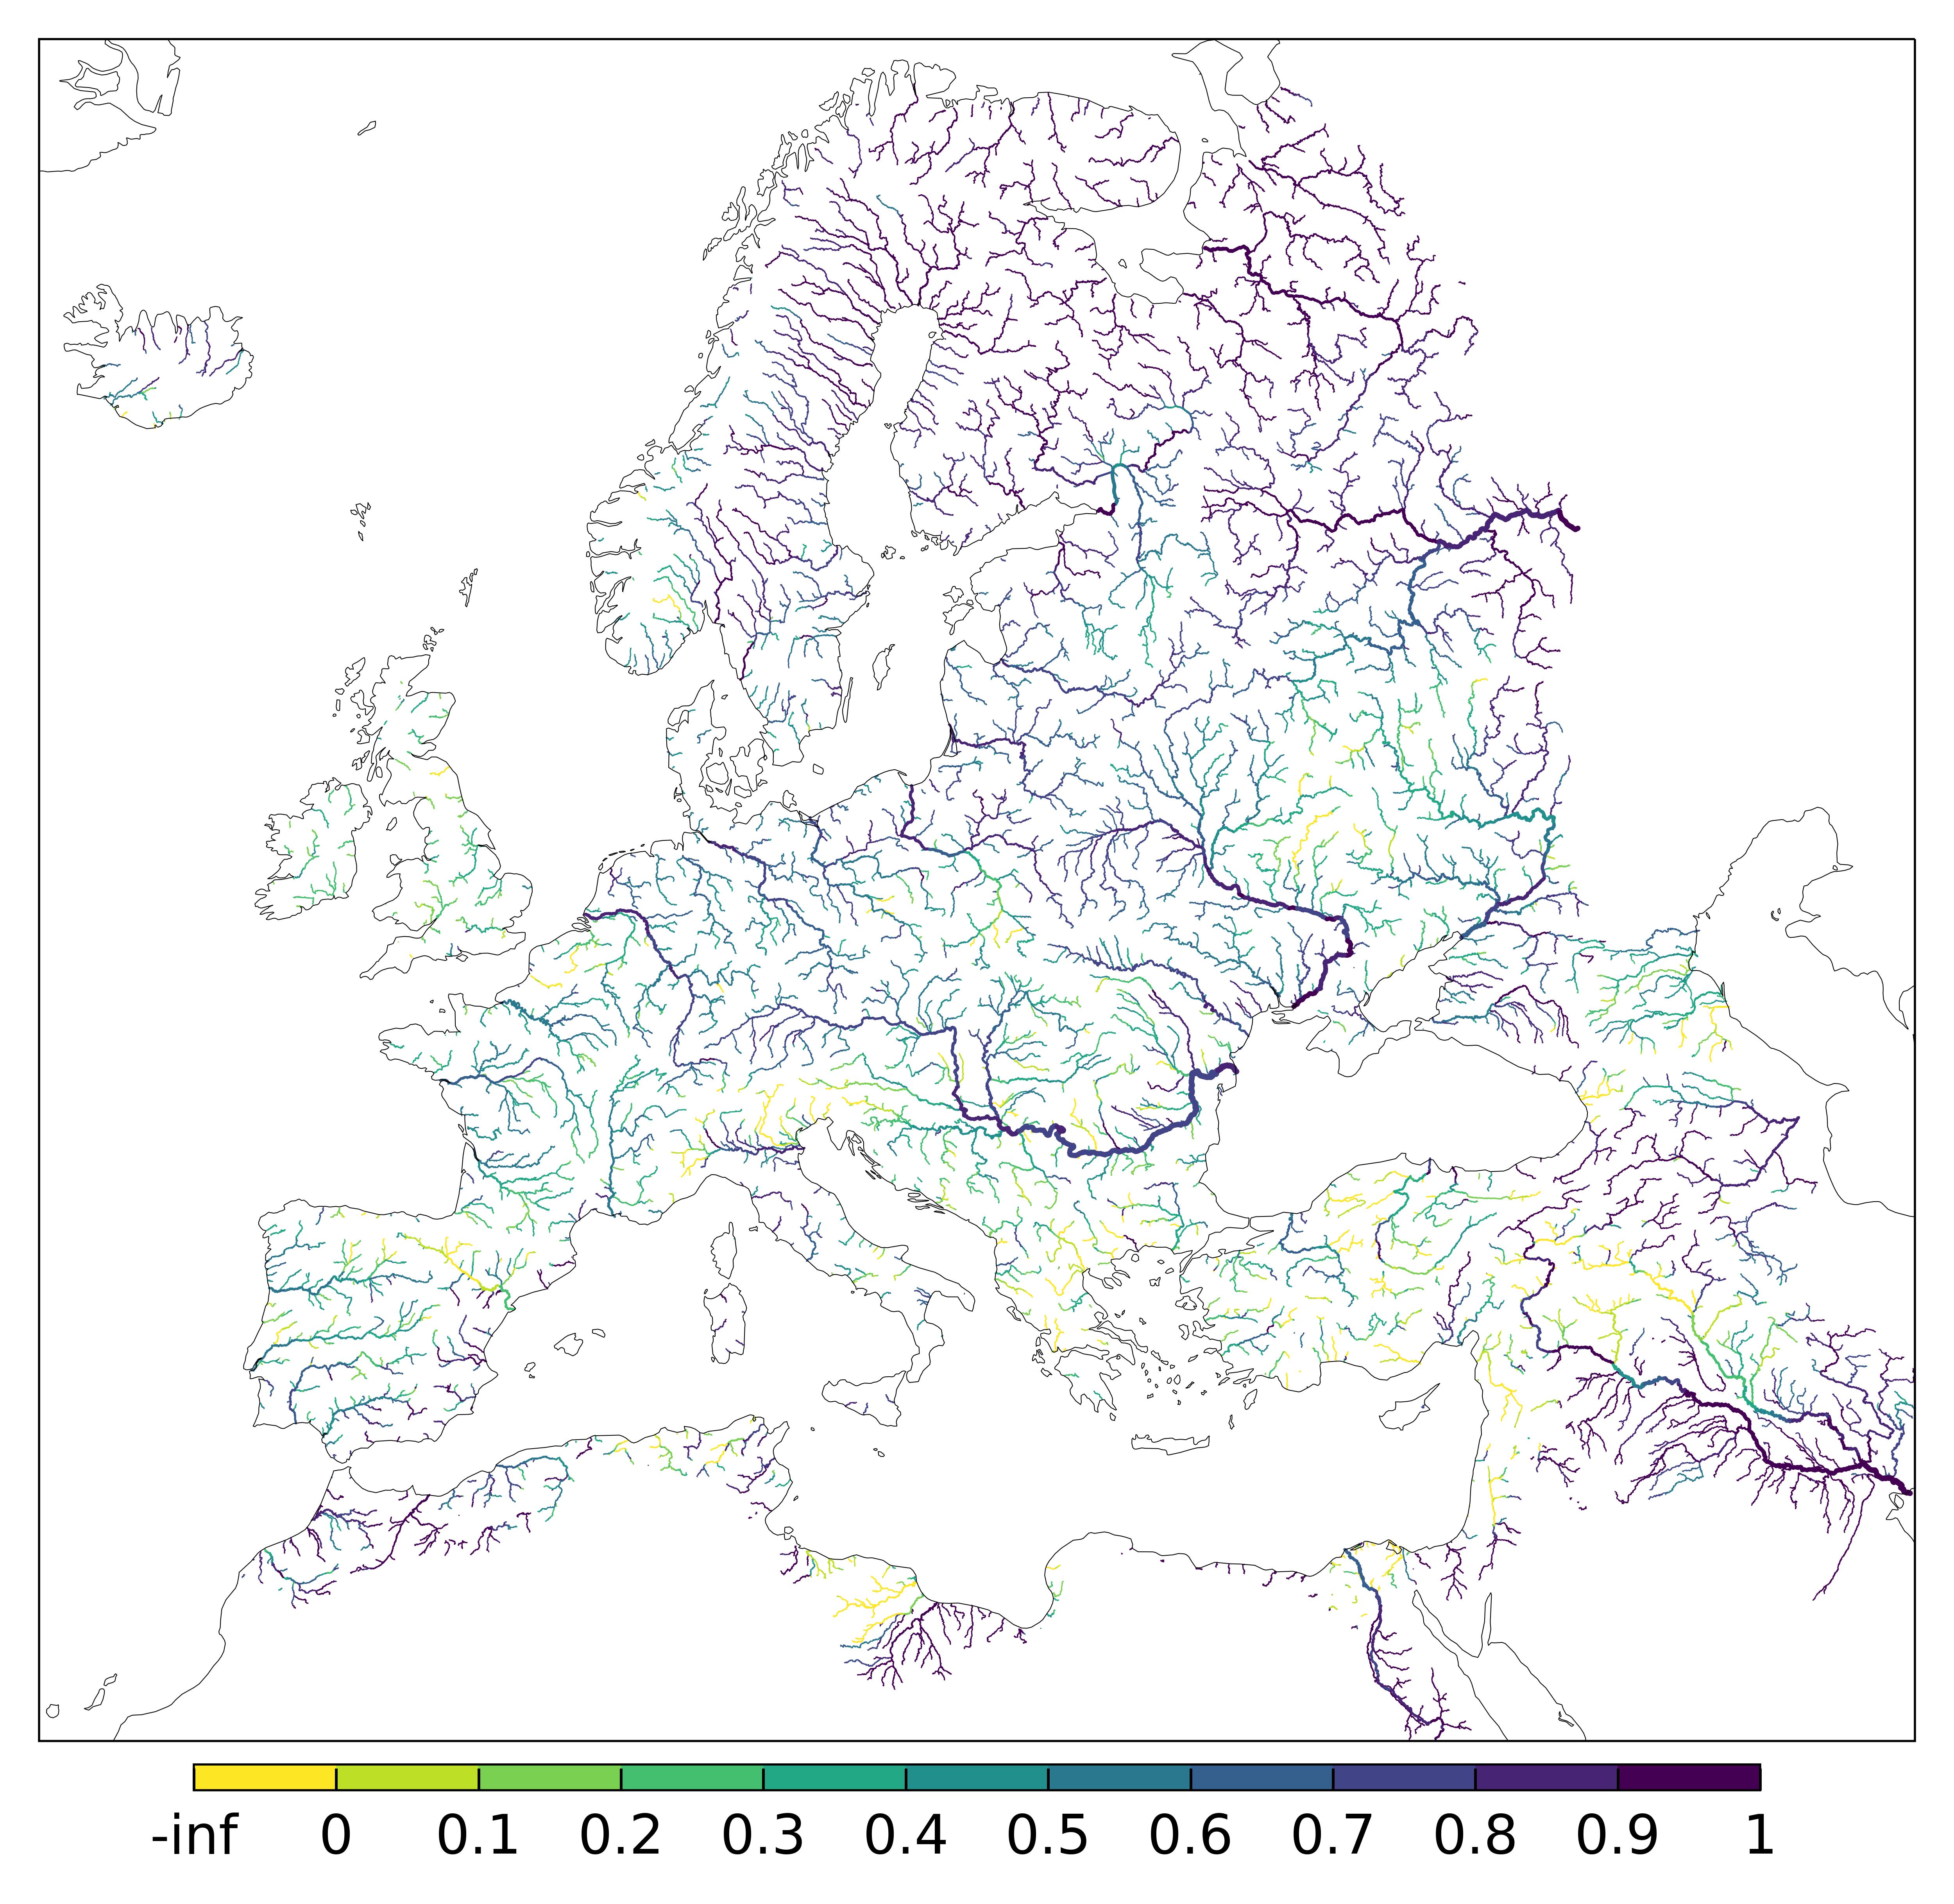 Figure 4. EFAS CRPSS at lead-time 10 day for December 2023 across the EFAS domain for catchments larger than 1000km2. Climatology is used as the reference forecast.